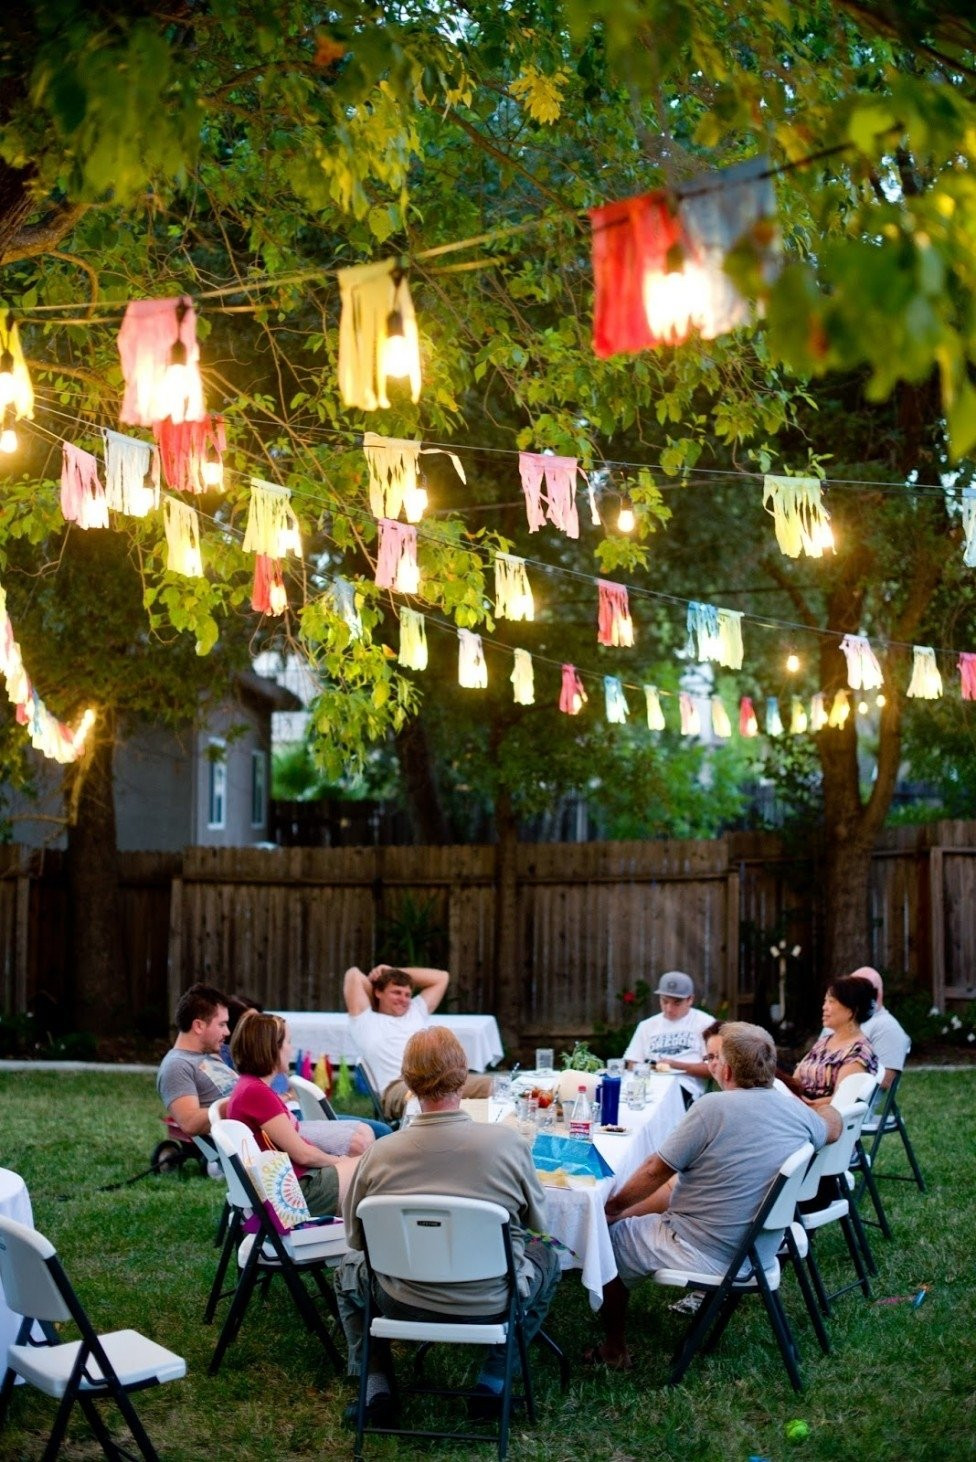 Ideas For Backyard Party
 10 Famous Outdoor Birthday Party Ideas For Adults 2019